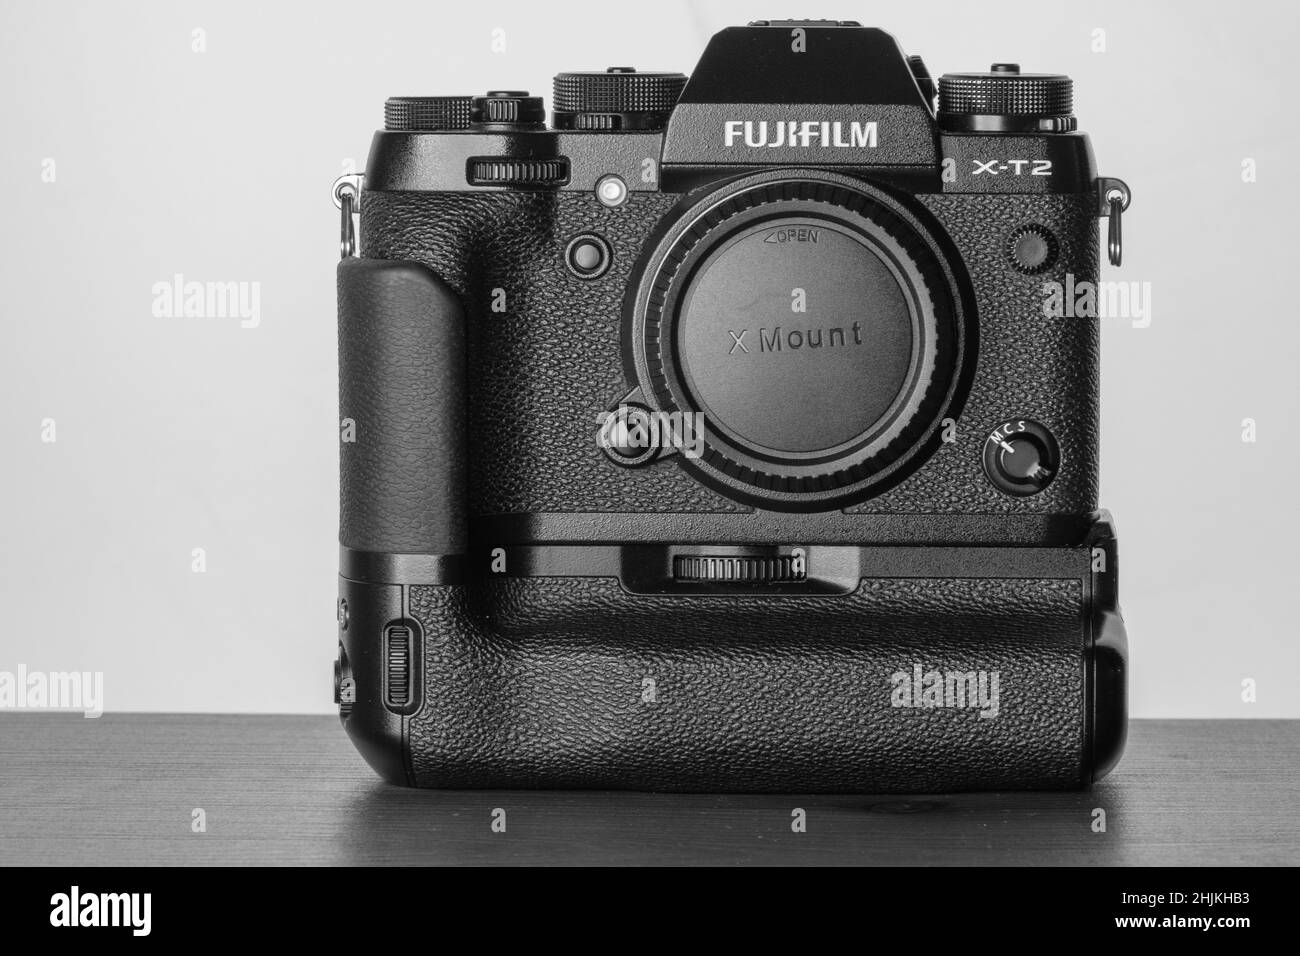 View of the mirrorless Fuji film aps-c camera with a battery grip on in black and white Stock Photo